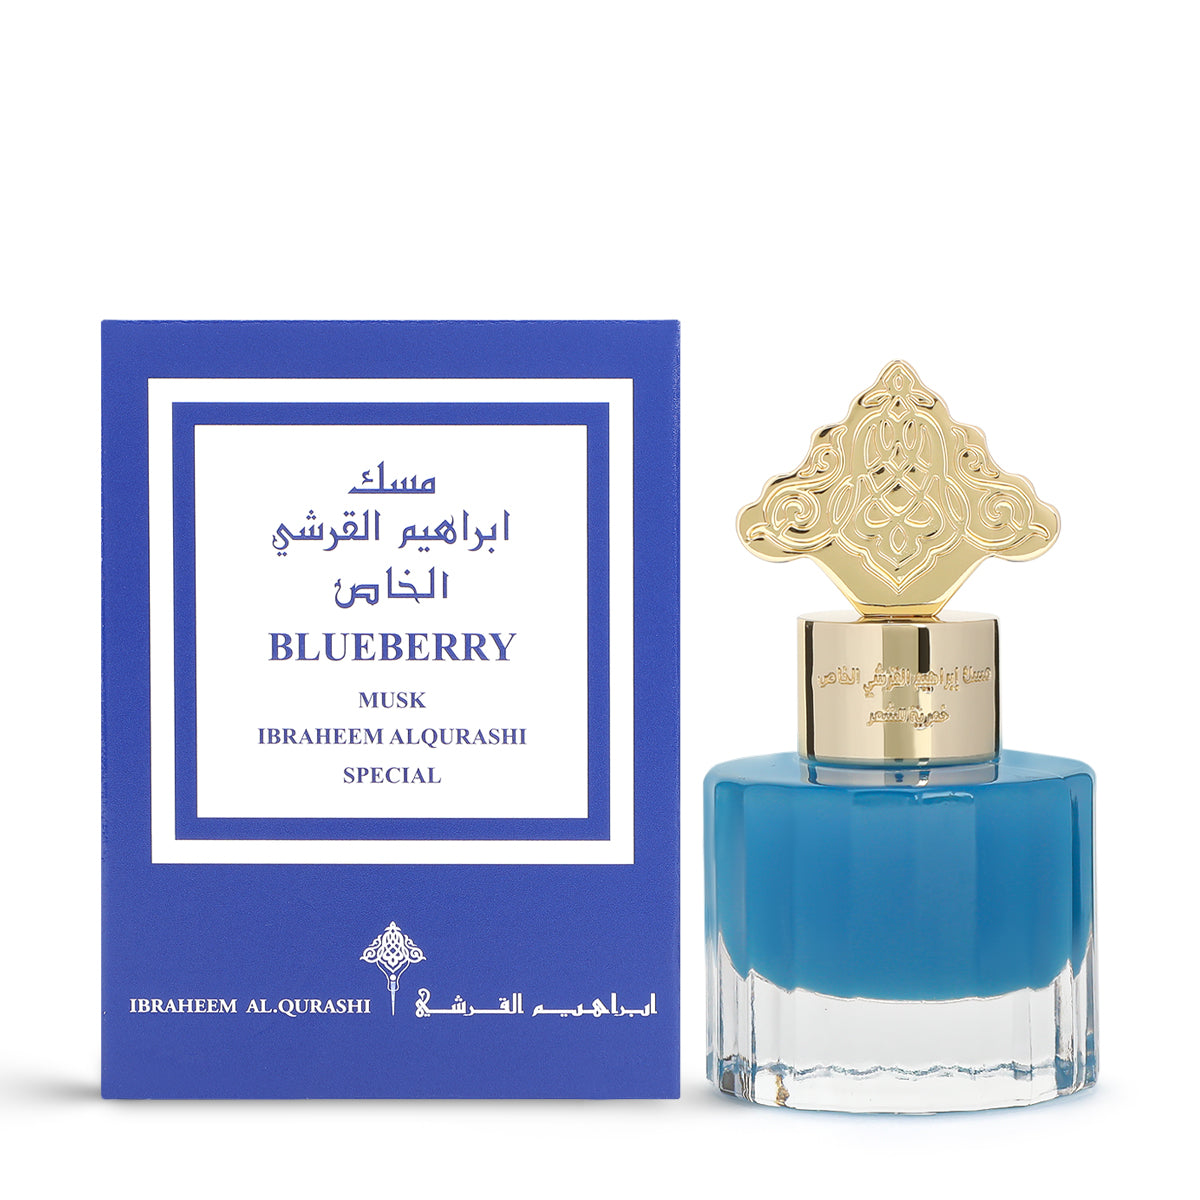 This image shows a square-shaped perfume bottle with a blue to clear gradient and a decorative gold cap, positioned in front of its packaging. The package is blue with a framed white label that includes Arabic calligraphy, the words "BLUEBERRY MUSK," and "IBRAHEEM ALQURASHI SPECIAL" in English. The logo of Ibraheem Al Qurashi is also visible at the bottom of the package.